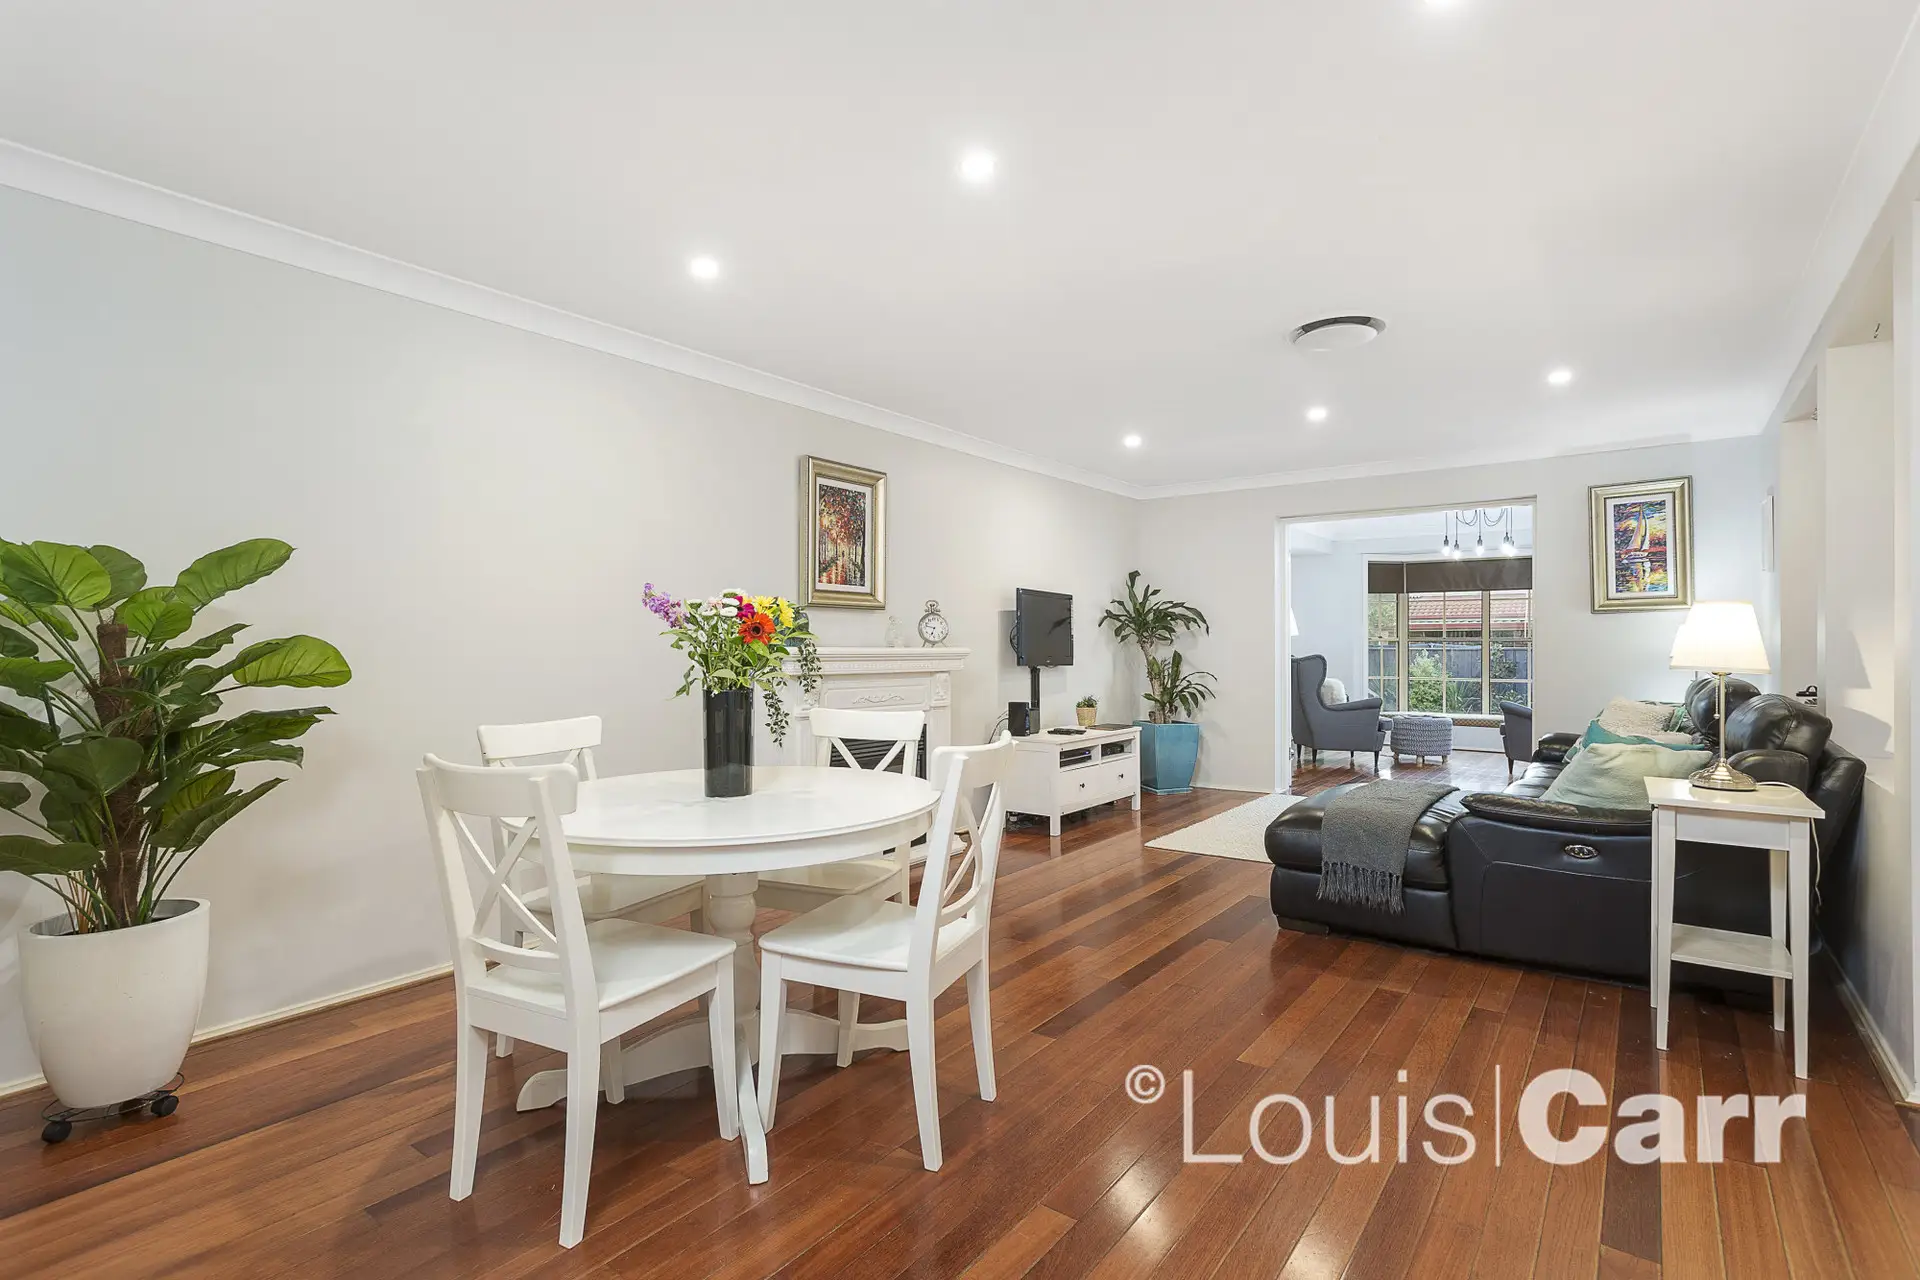 44 Millcroft Way, Beaumont Hills Sold by Louis Carr Real Estate - image 1